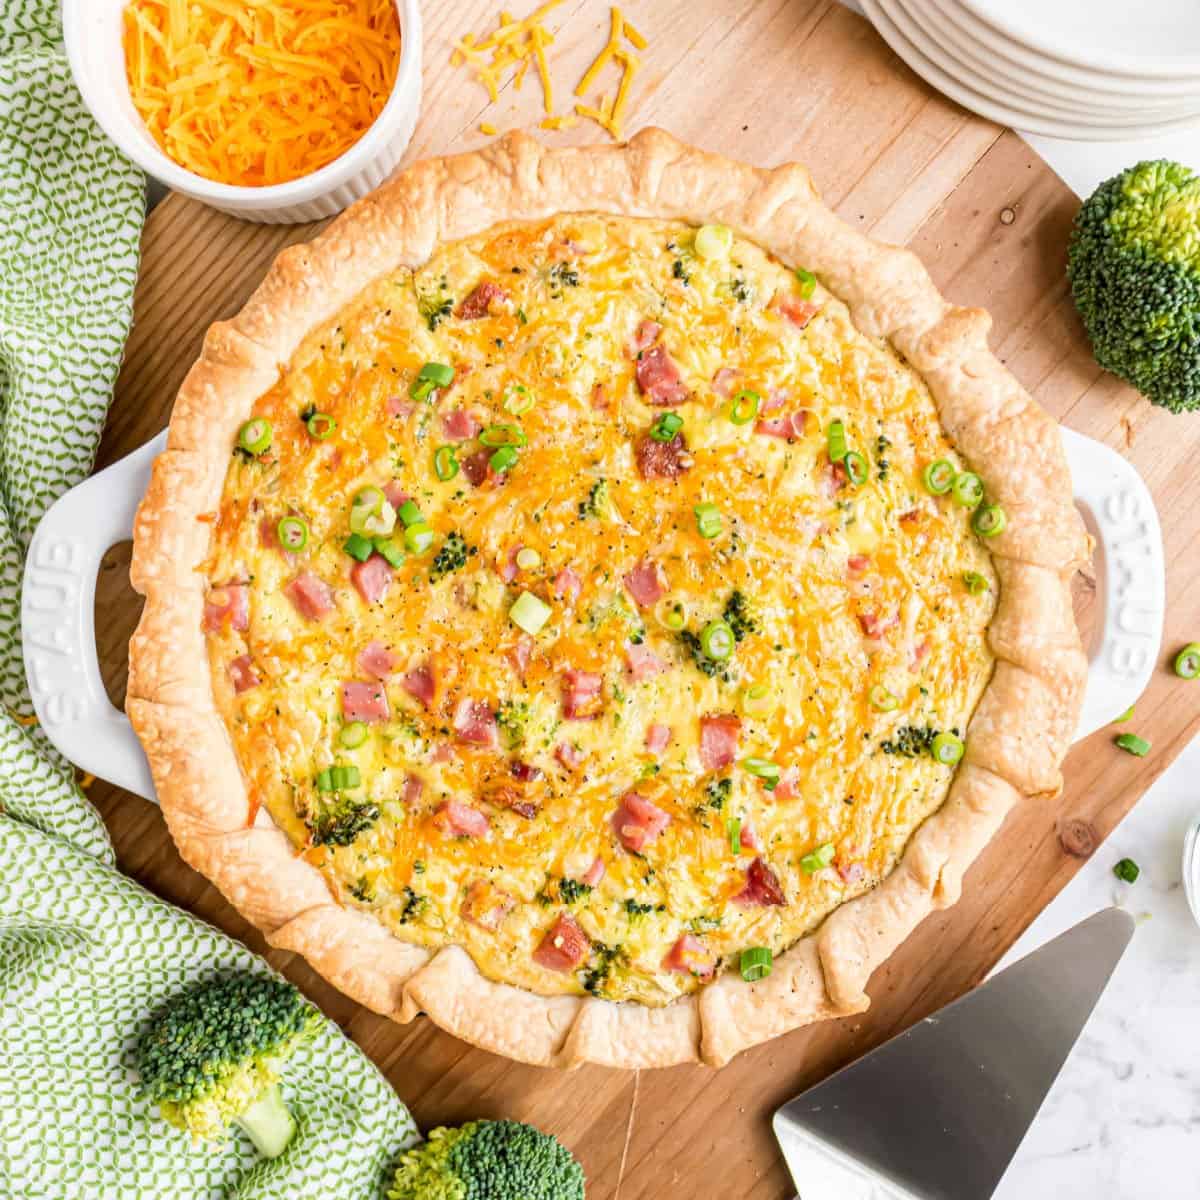 Ham and cheese quiche baked in a pie plate.